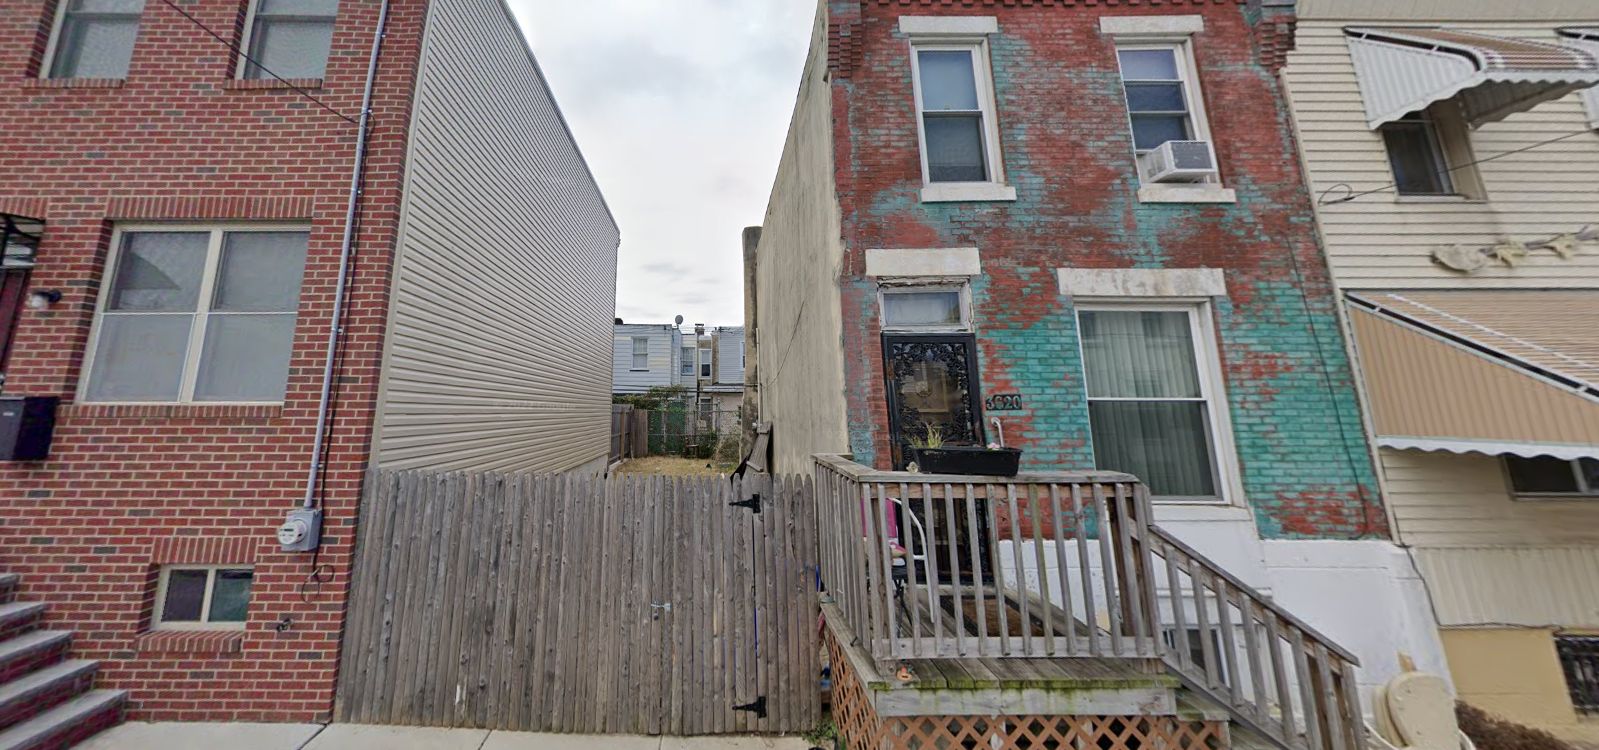 3618 Sears Street. Site conditions prior to redevelopment. Looking south. October 2019. Credit: Google Maps